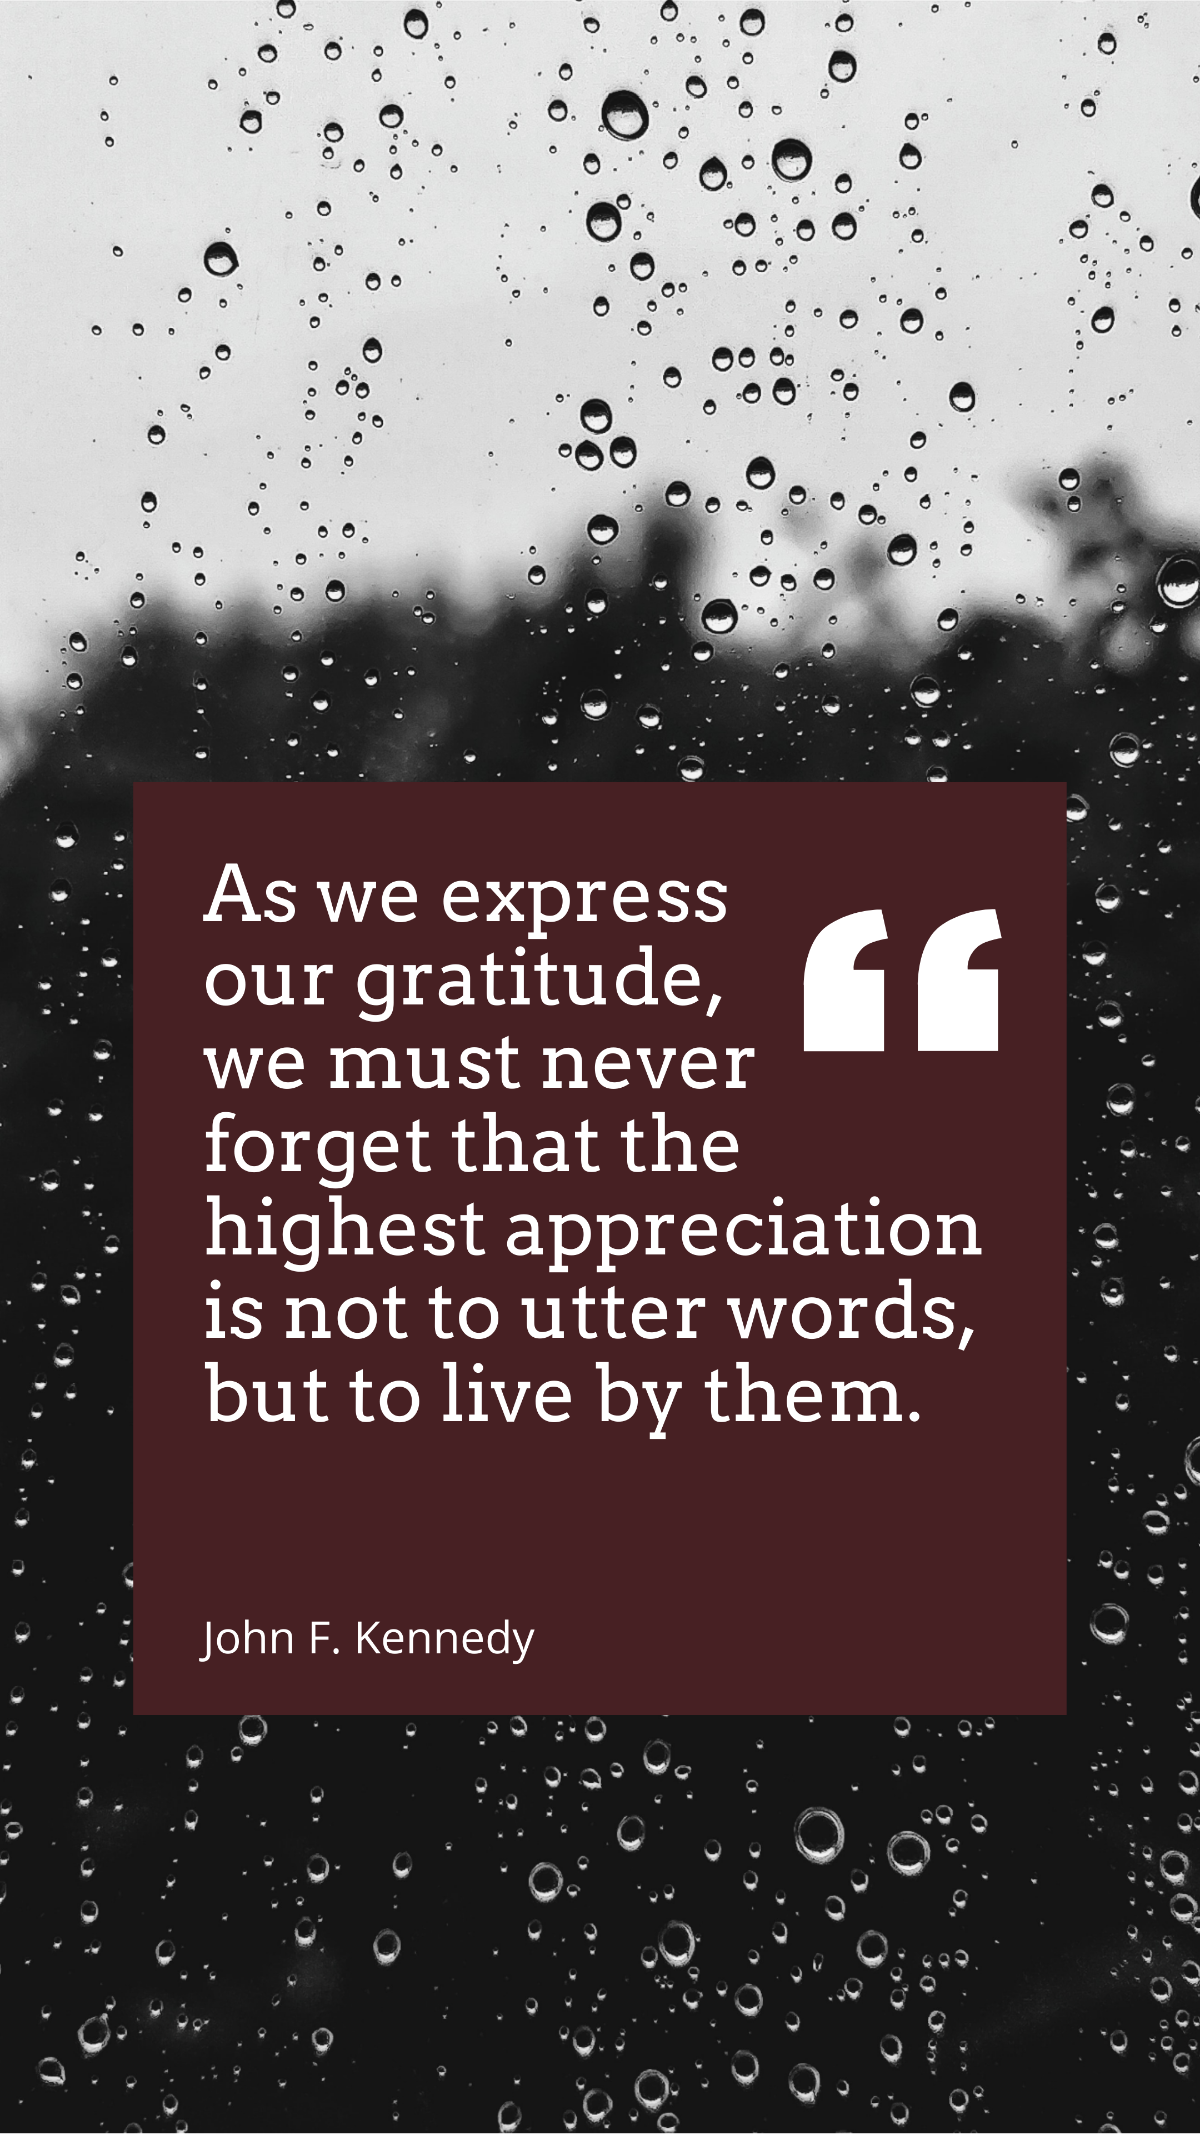 John F. Kennedy - As we express our gratitude, we must never forget that the highest appreciation is not to utter words, but to live by them.